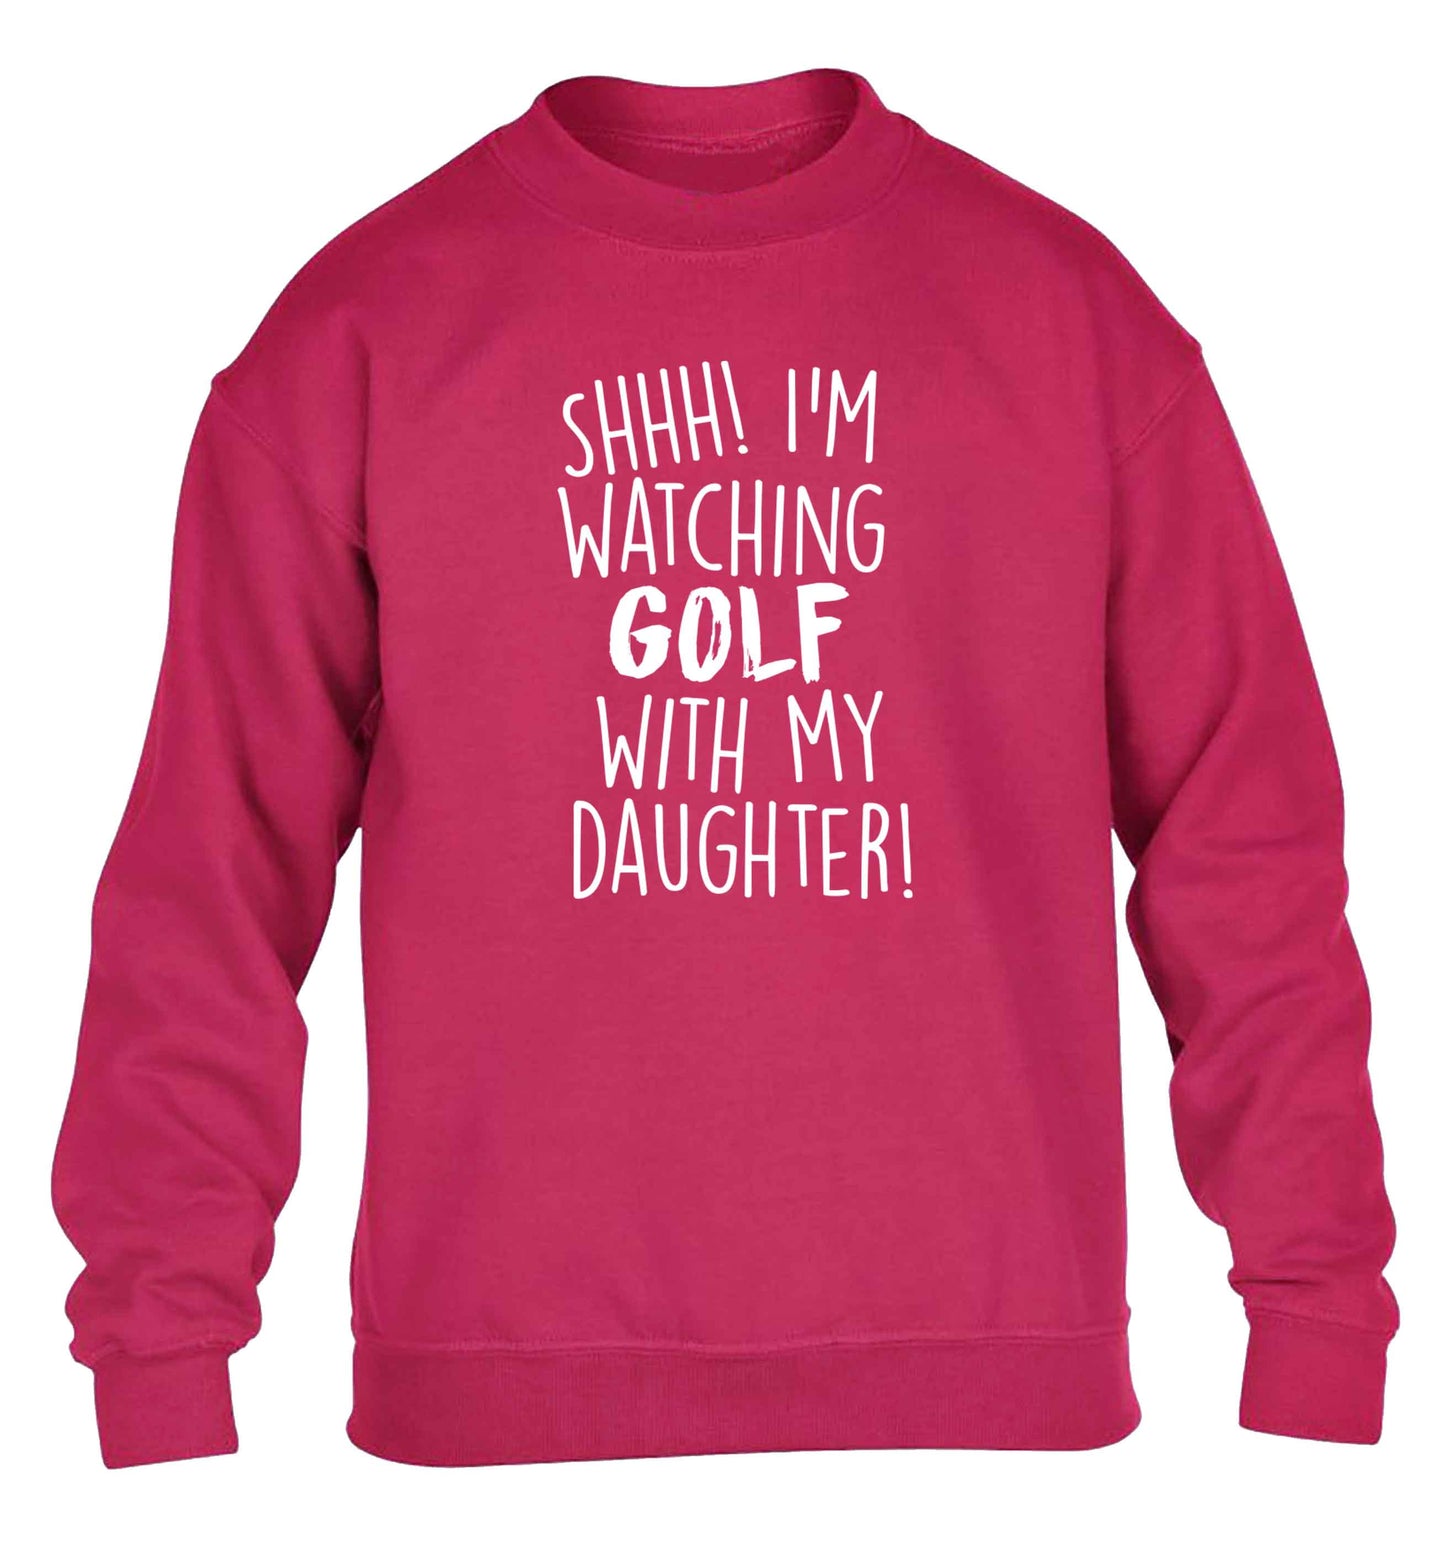 Shh I'm watching golf with my daughter children's pink sweater 12-13 Years